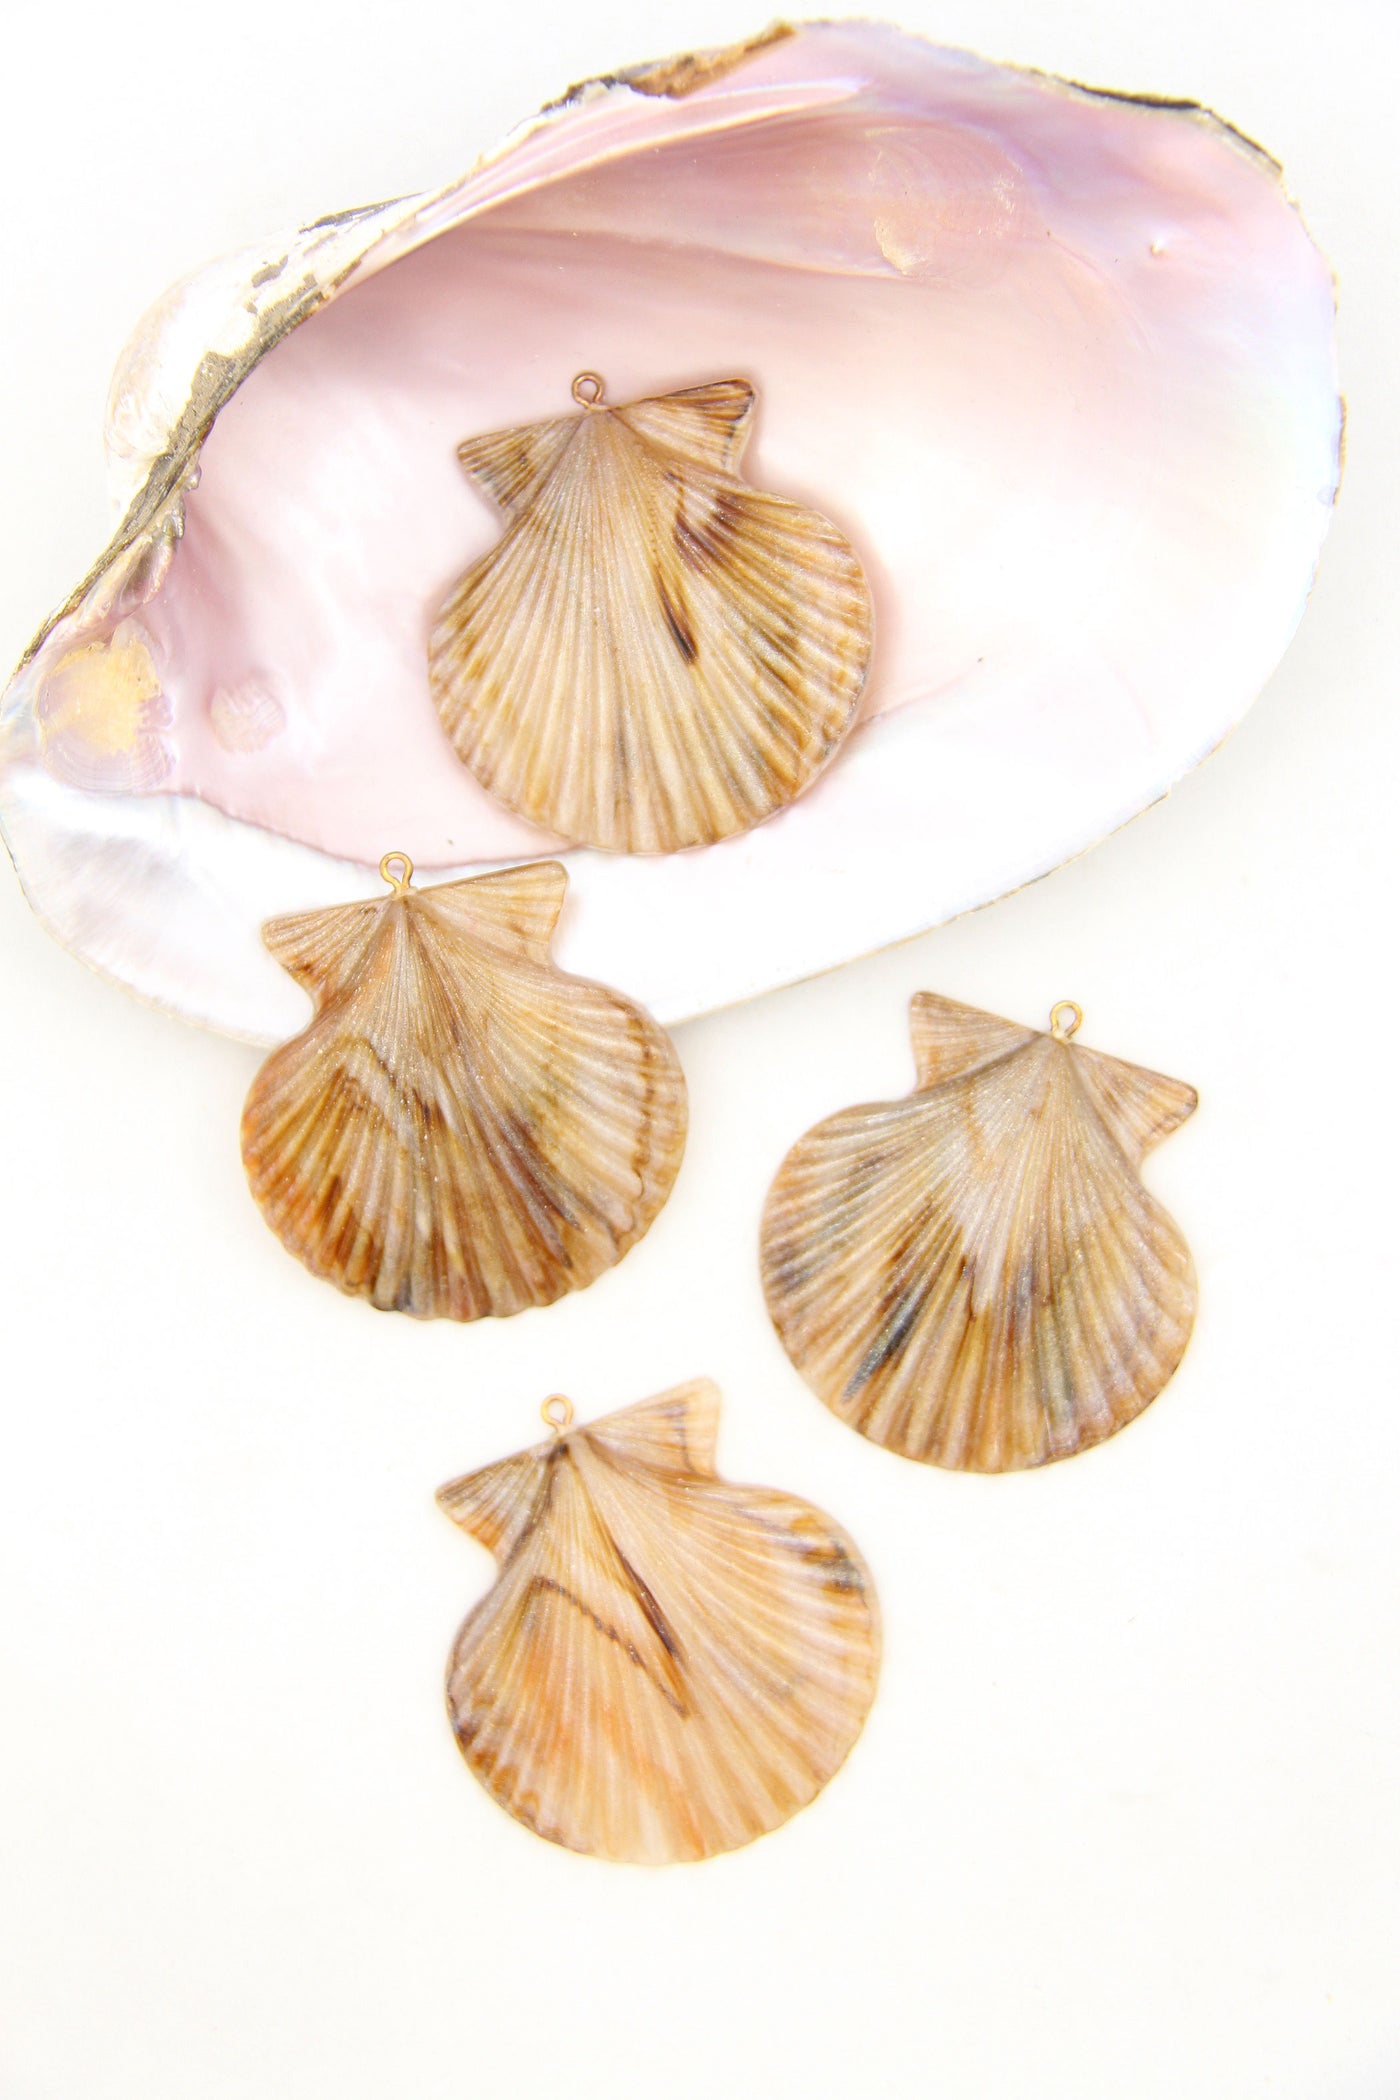 Clam Shell in Neutral, Mermaidcore DIY Jewelry Component